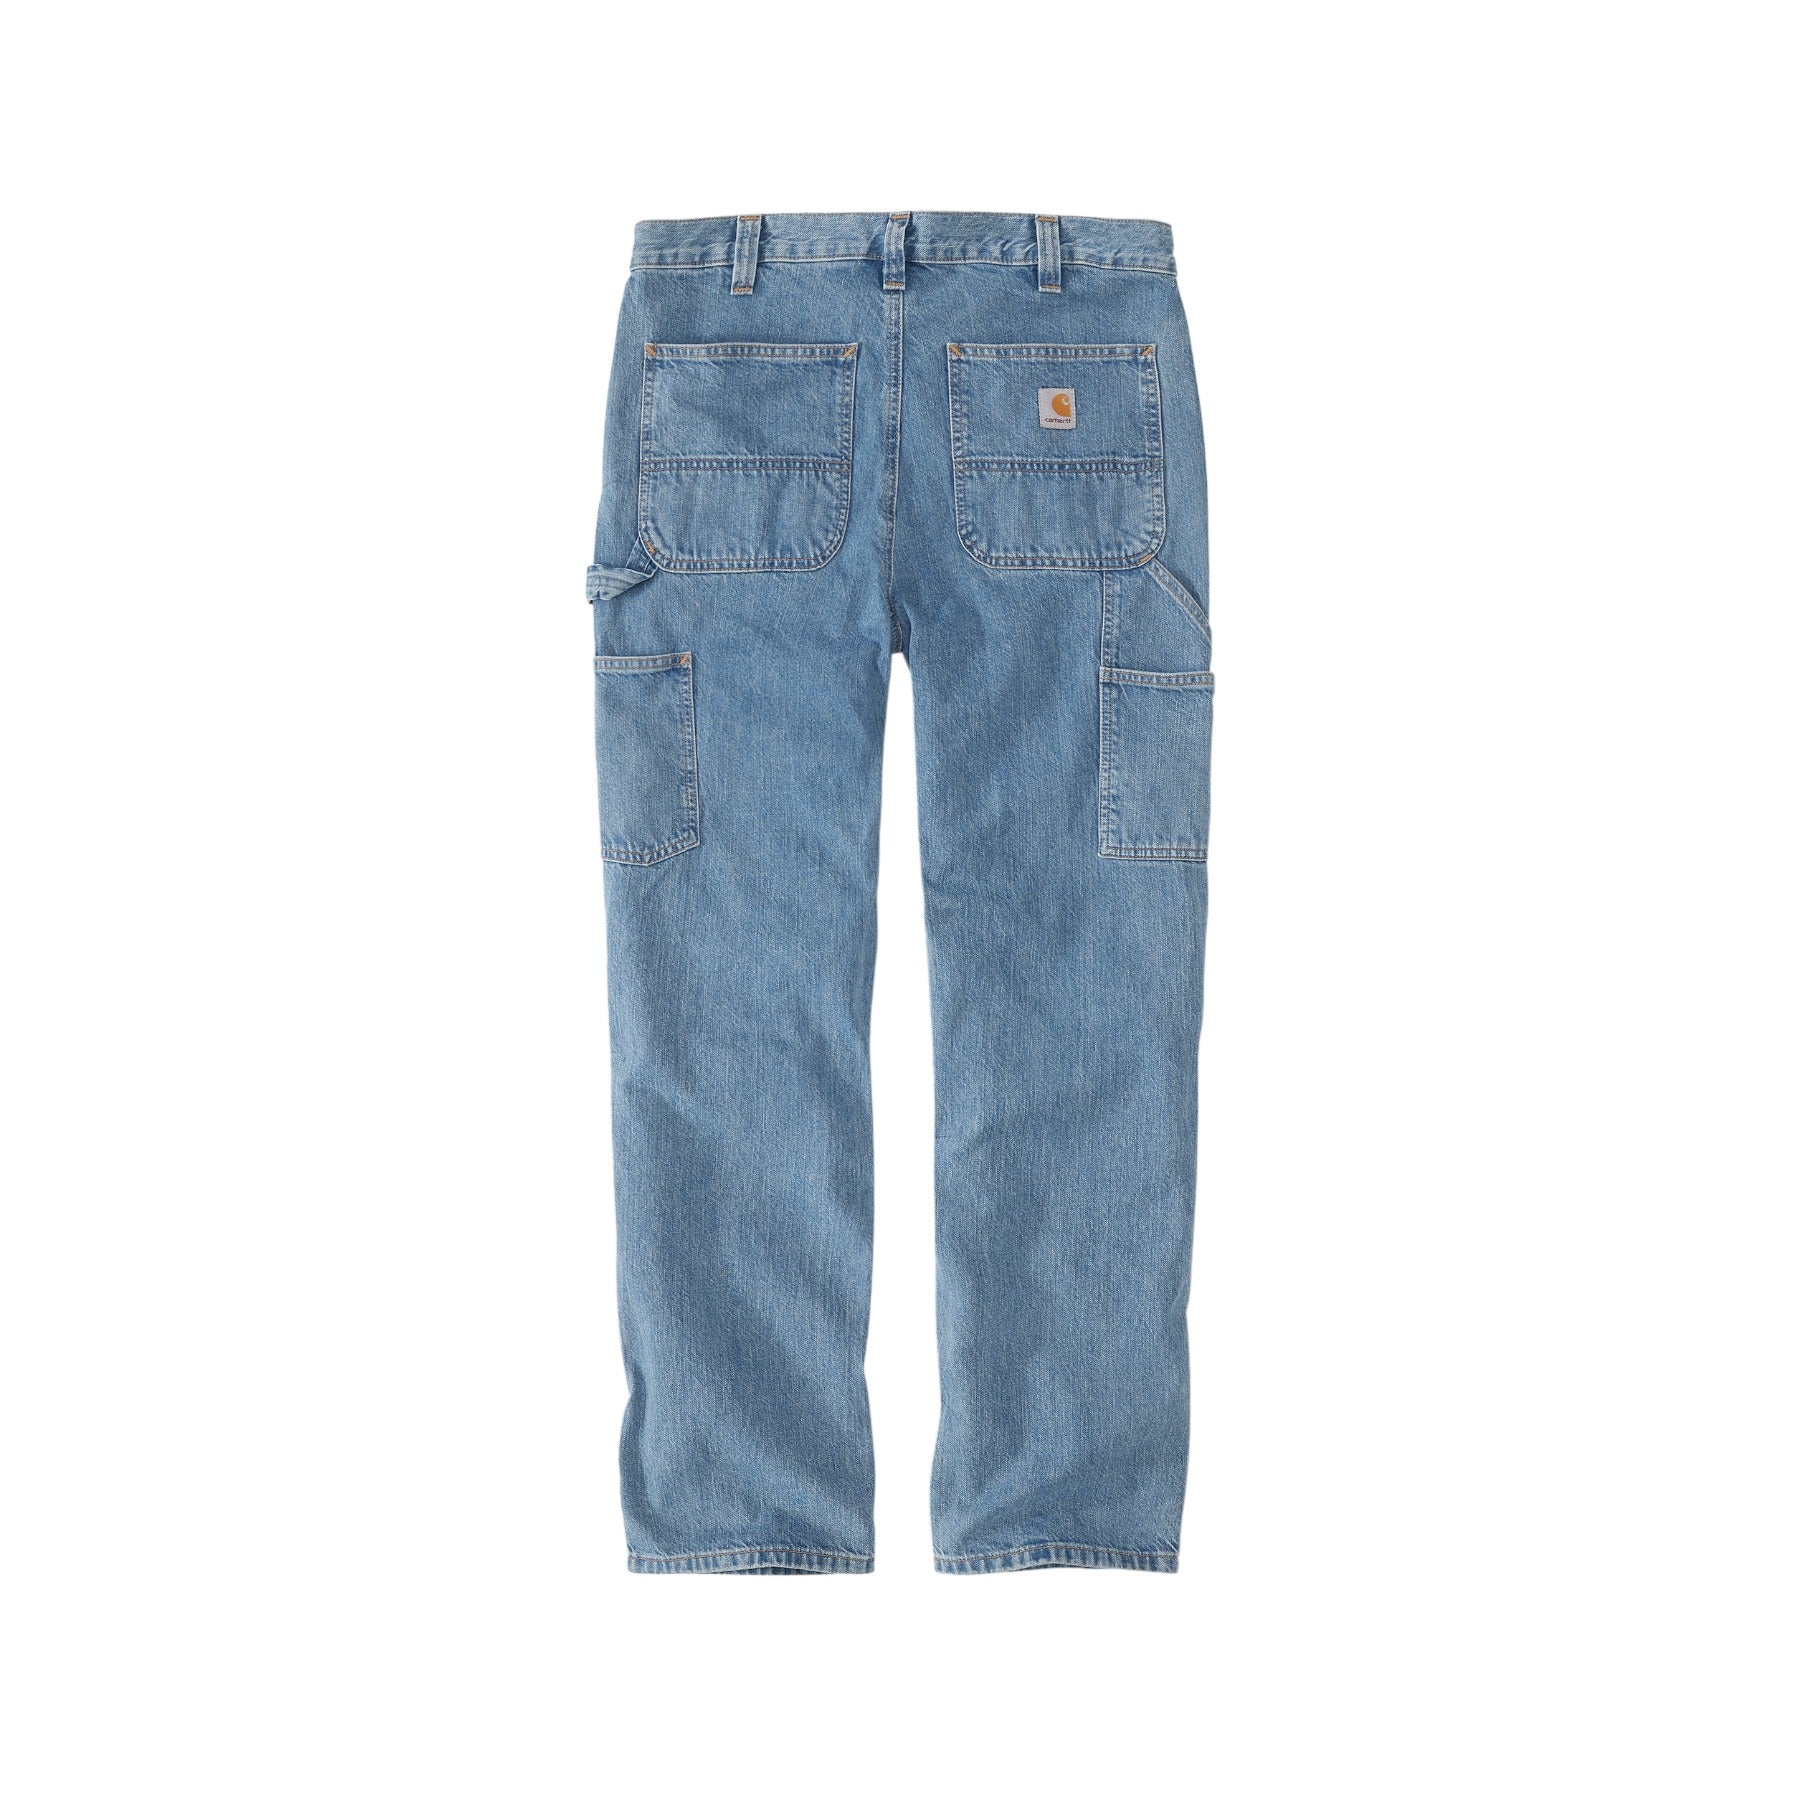 Carhartt Loose Fit Utility Jeans - Cove